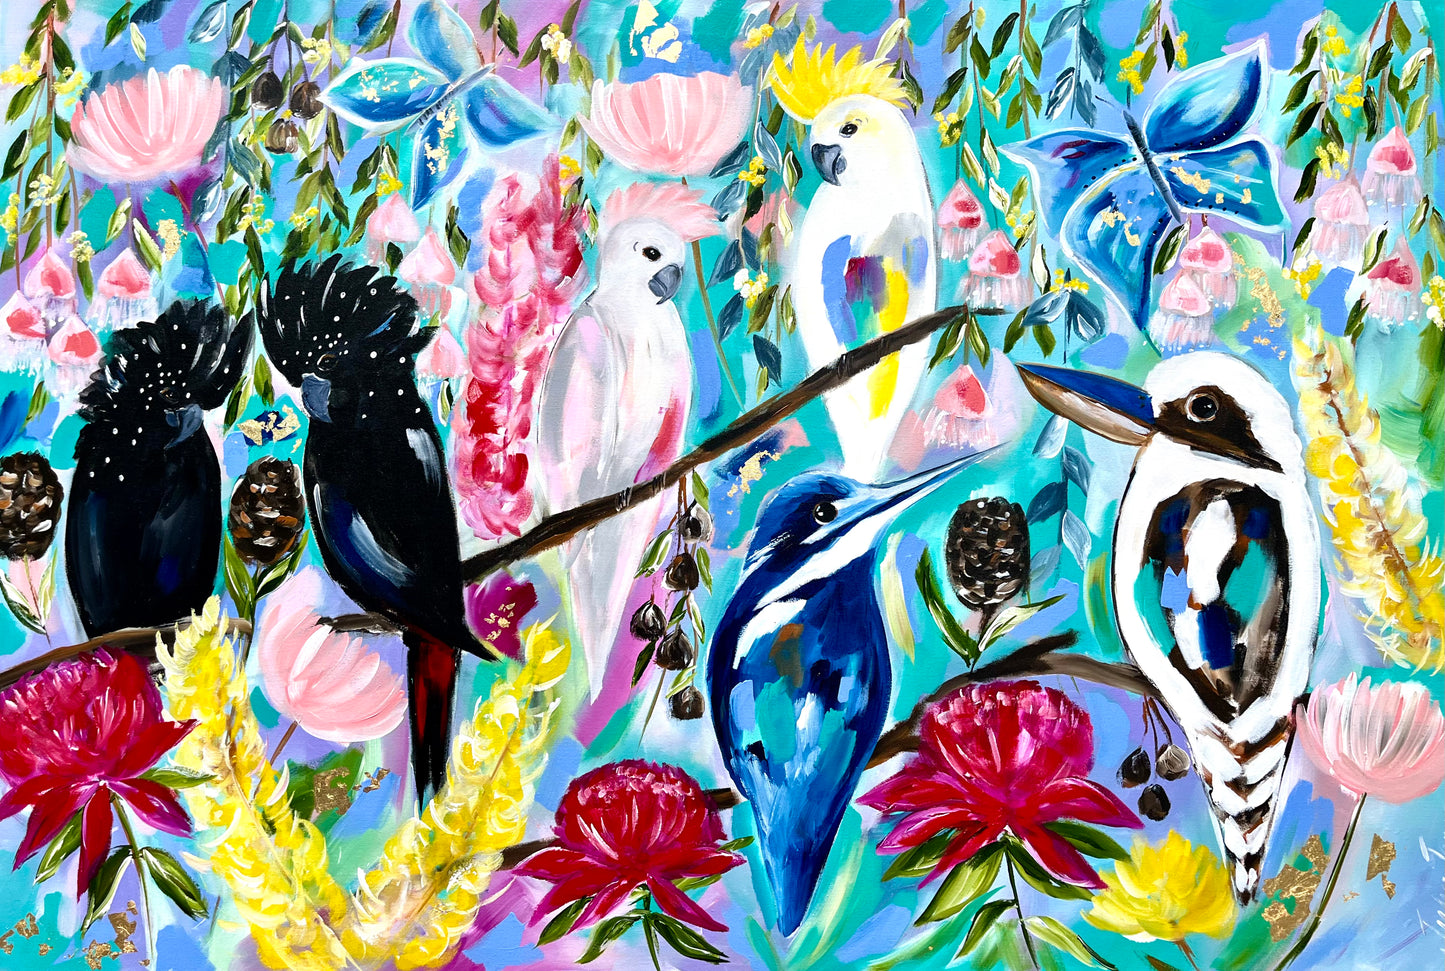 Butterfly’s and Parrots - 1.5 x 1m - Original artwork available by commission